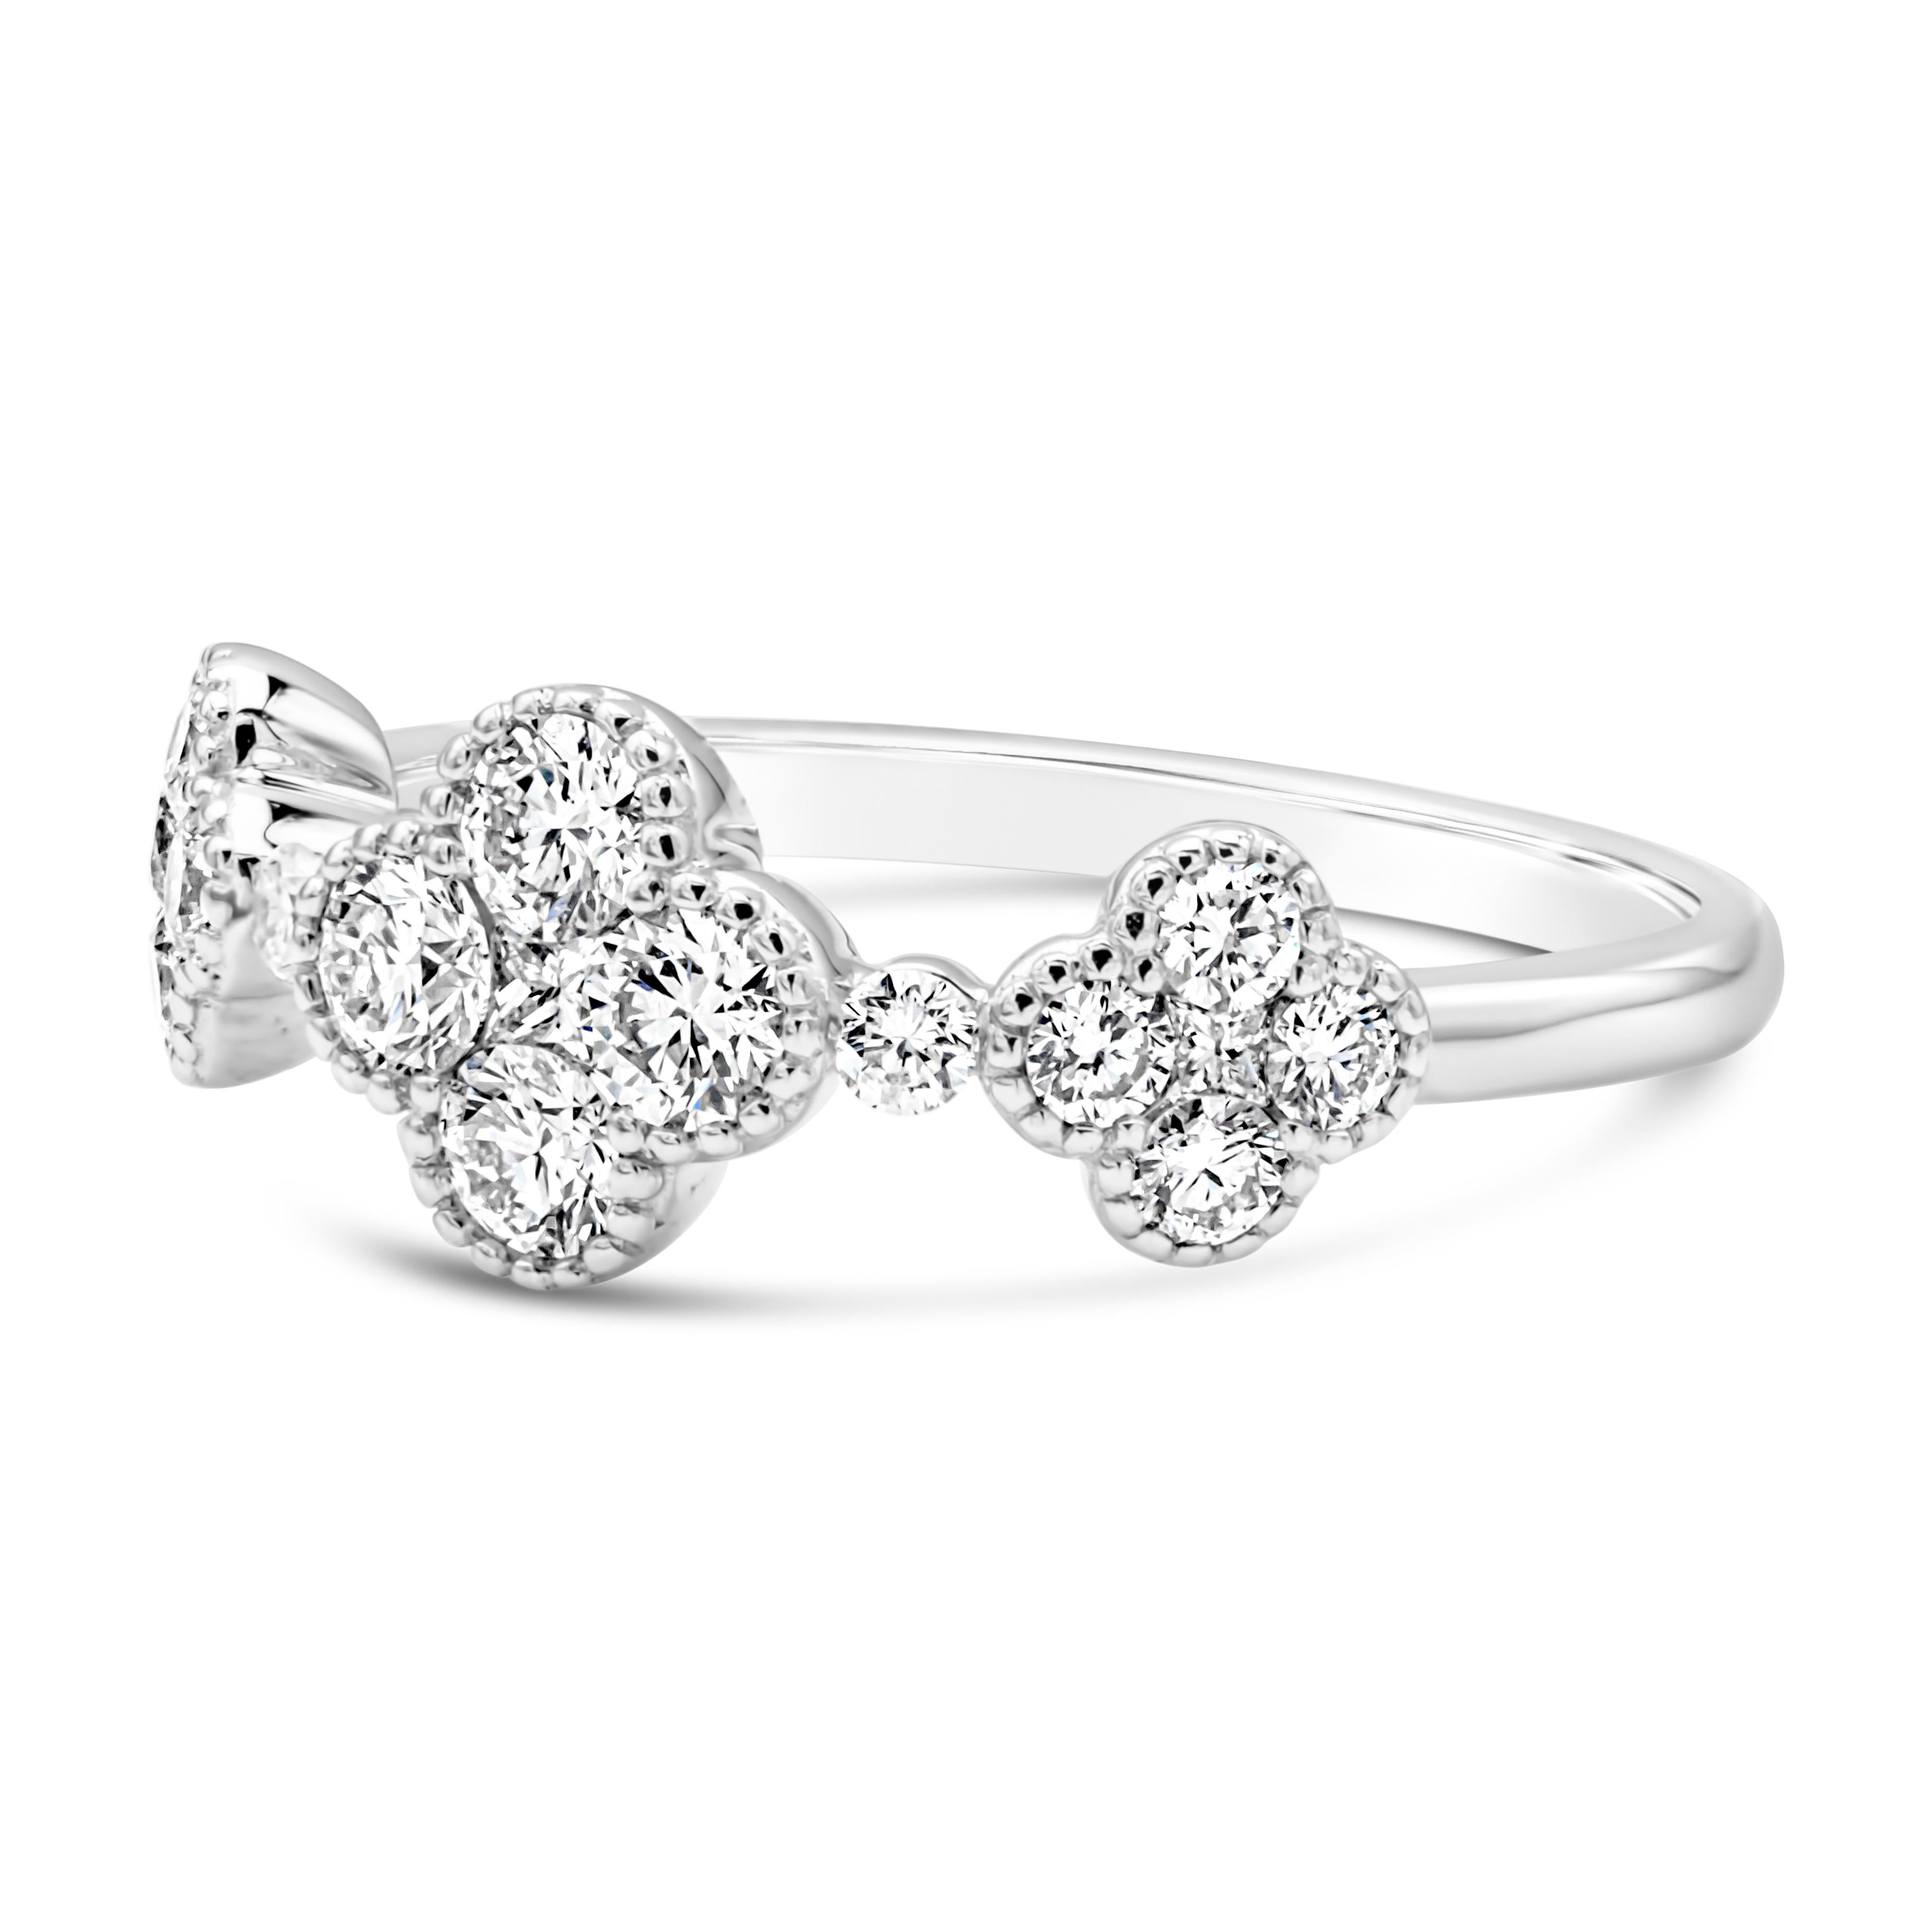 This unique and fashionable ring showcases three beautiful clover evenly spaced with brilliant round diamond in an accented 18k white gold mounting. Each clover is set with 5 brilliant round shape diamonds and set in a shared prong basket setting.